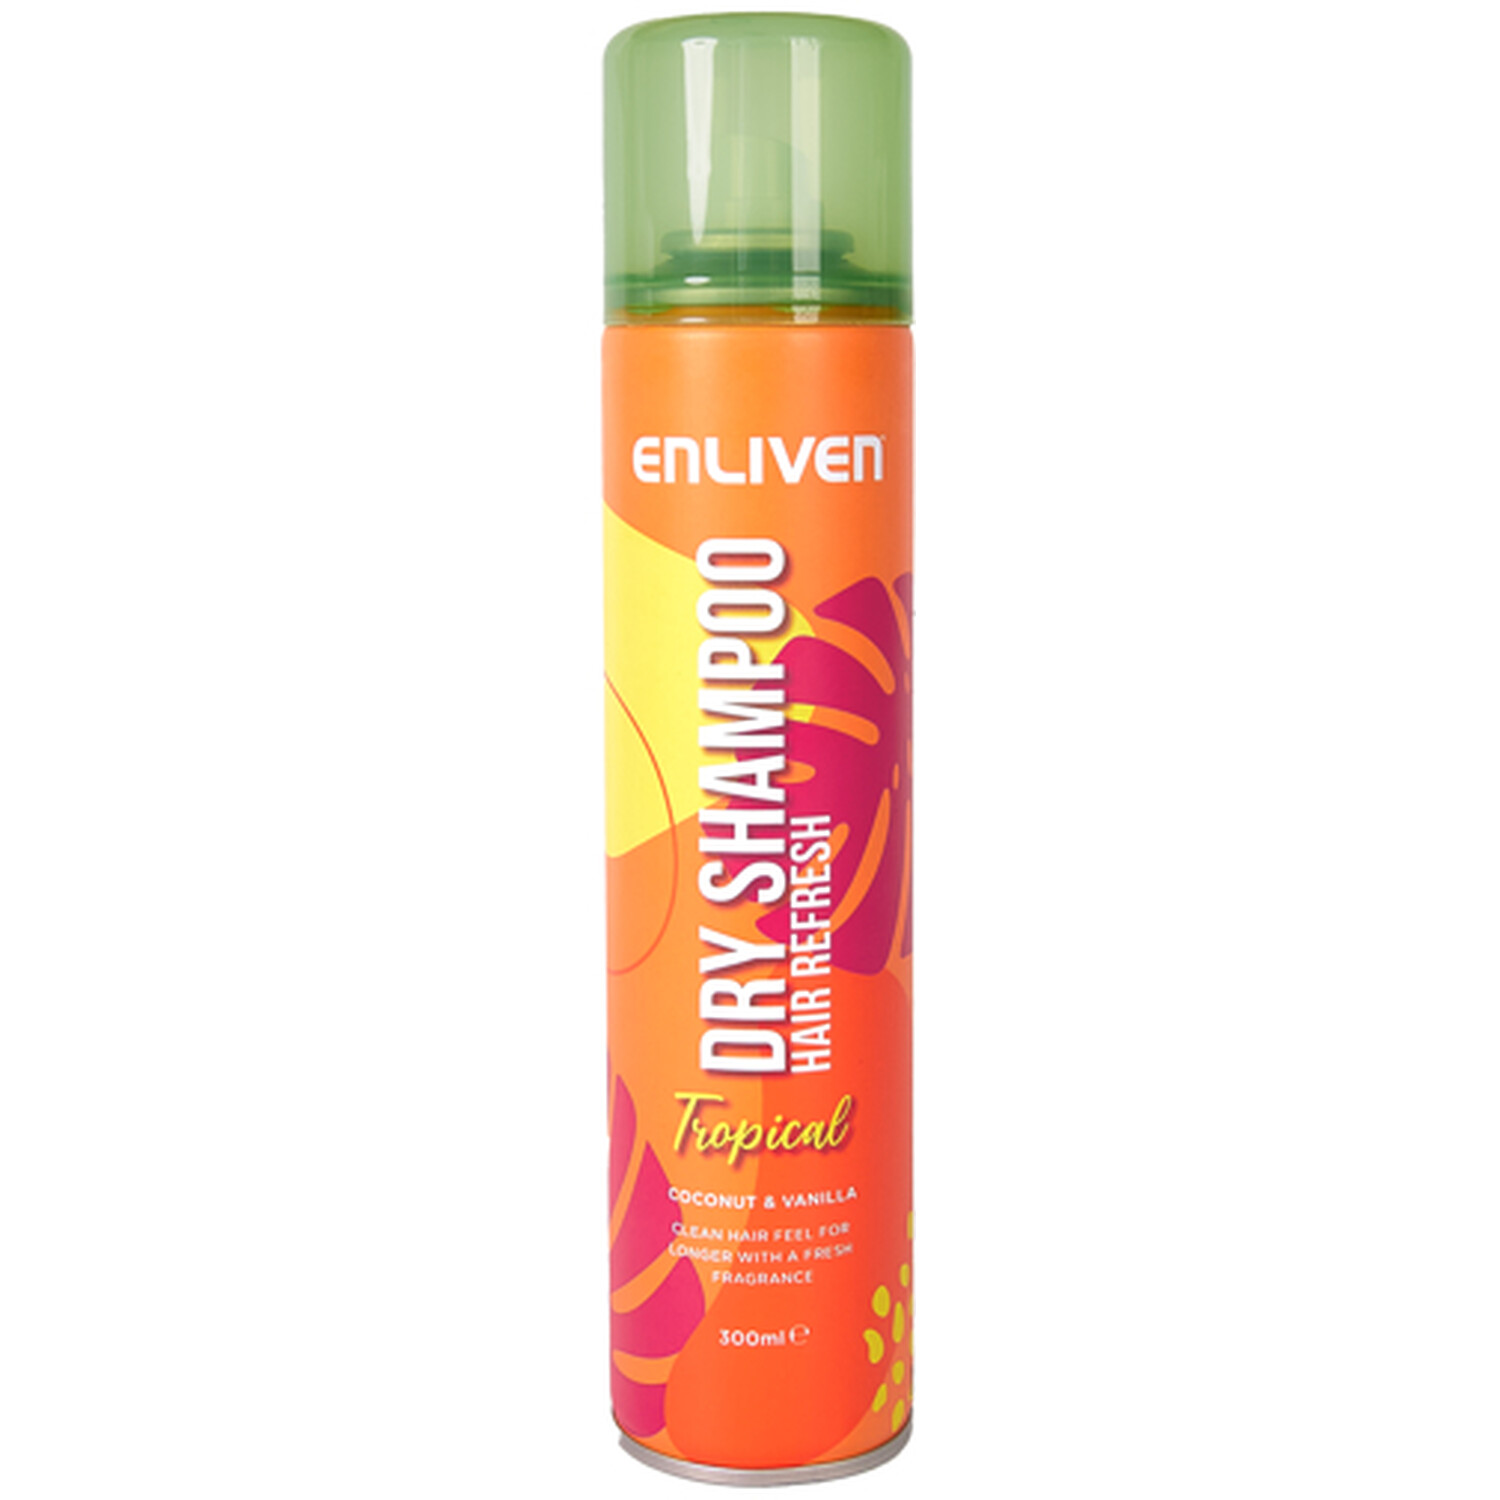 Enliven Dry Shampoo 300ml - Tropical Image